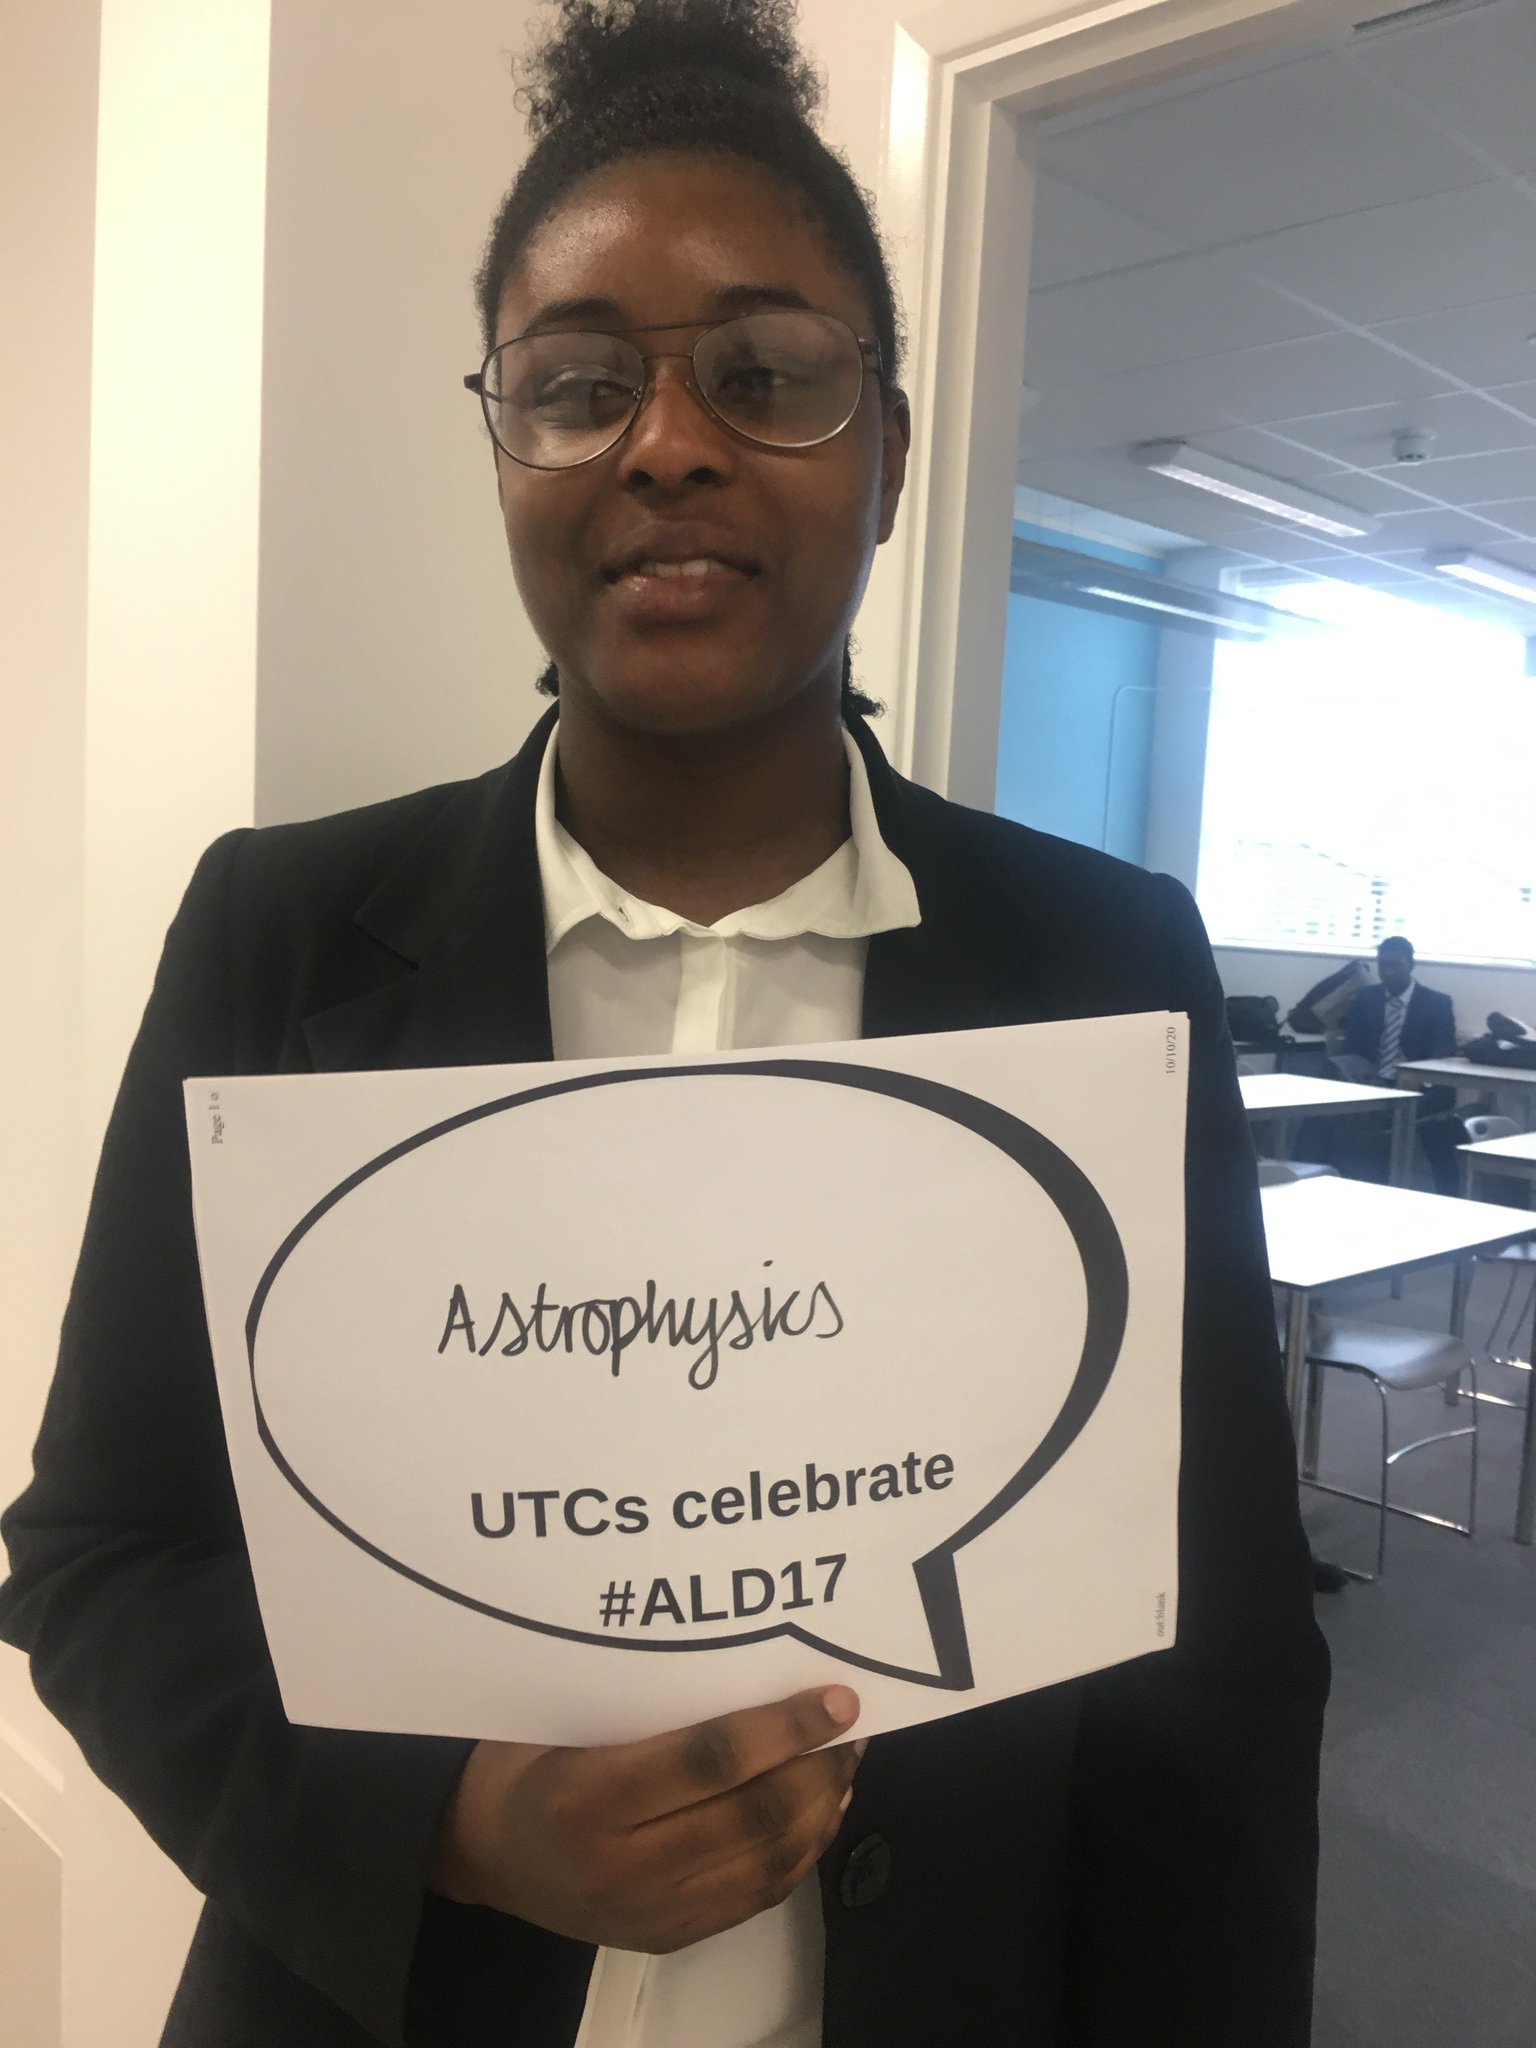 #AdaLovelaceDay @FindingAda #ALD17 Paige is studying A-level Maths, Physics, Chemistry & Engineering to become an Astro-Physicist #ThinkUTC https://t.co/MIq0g9TTMj